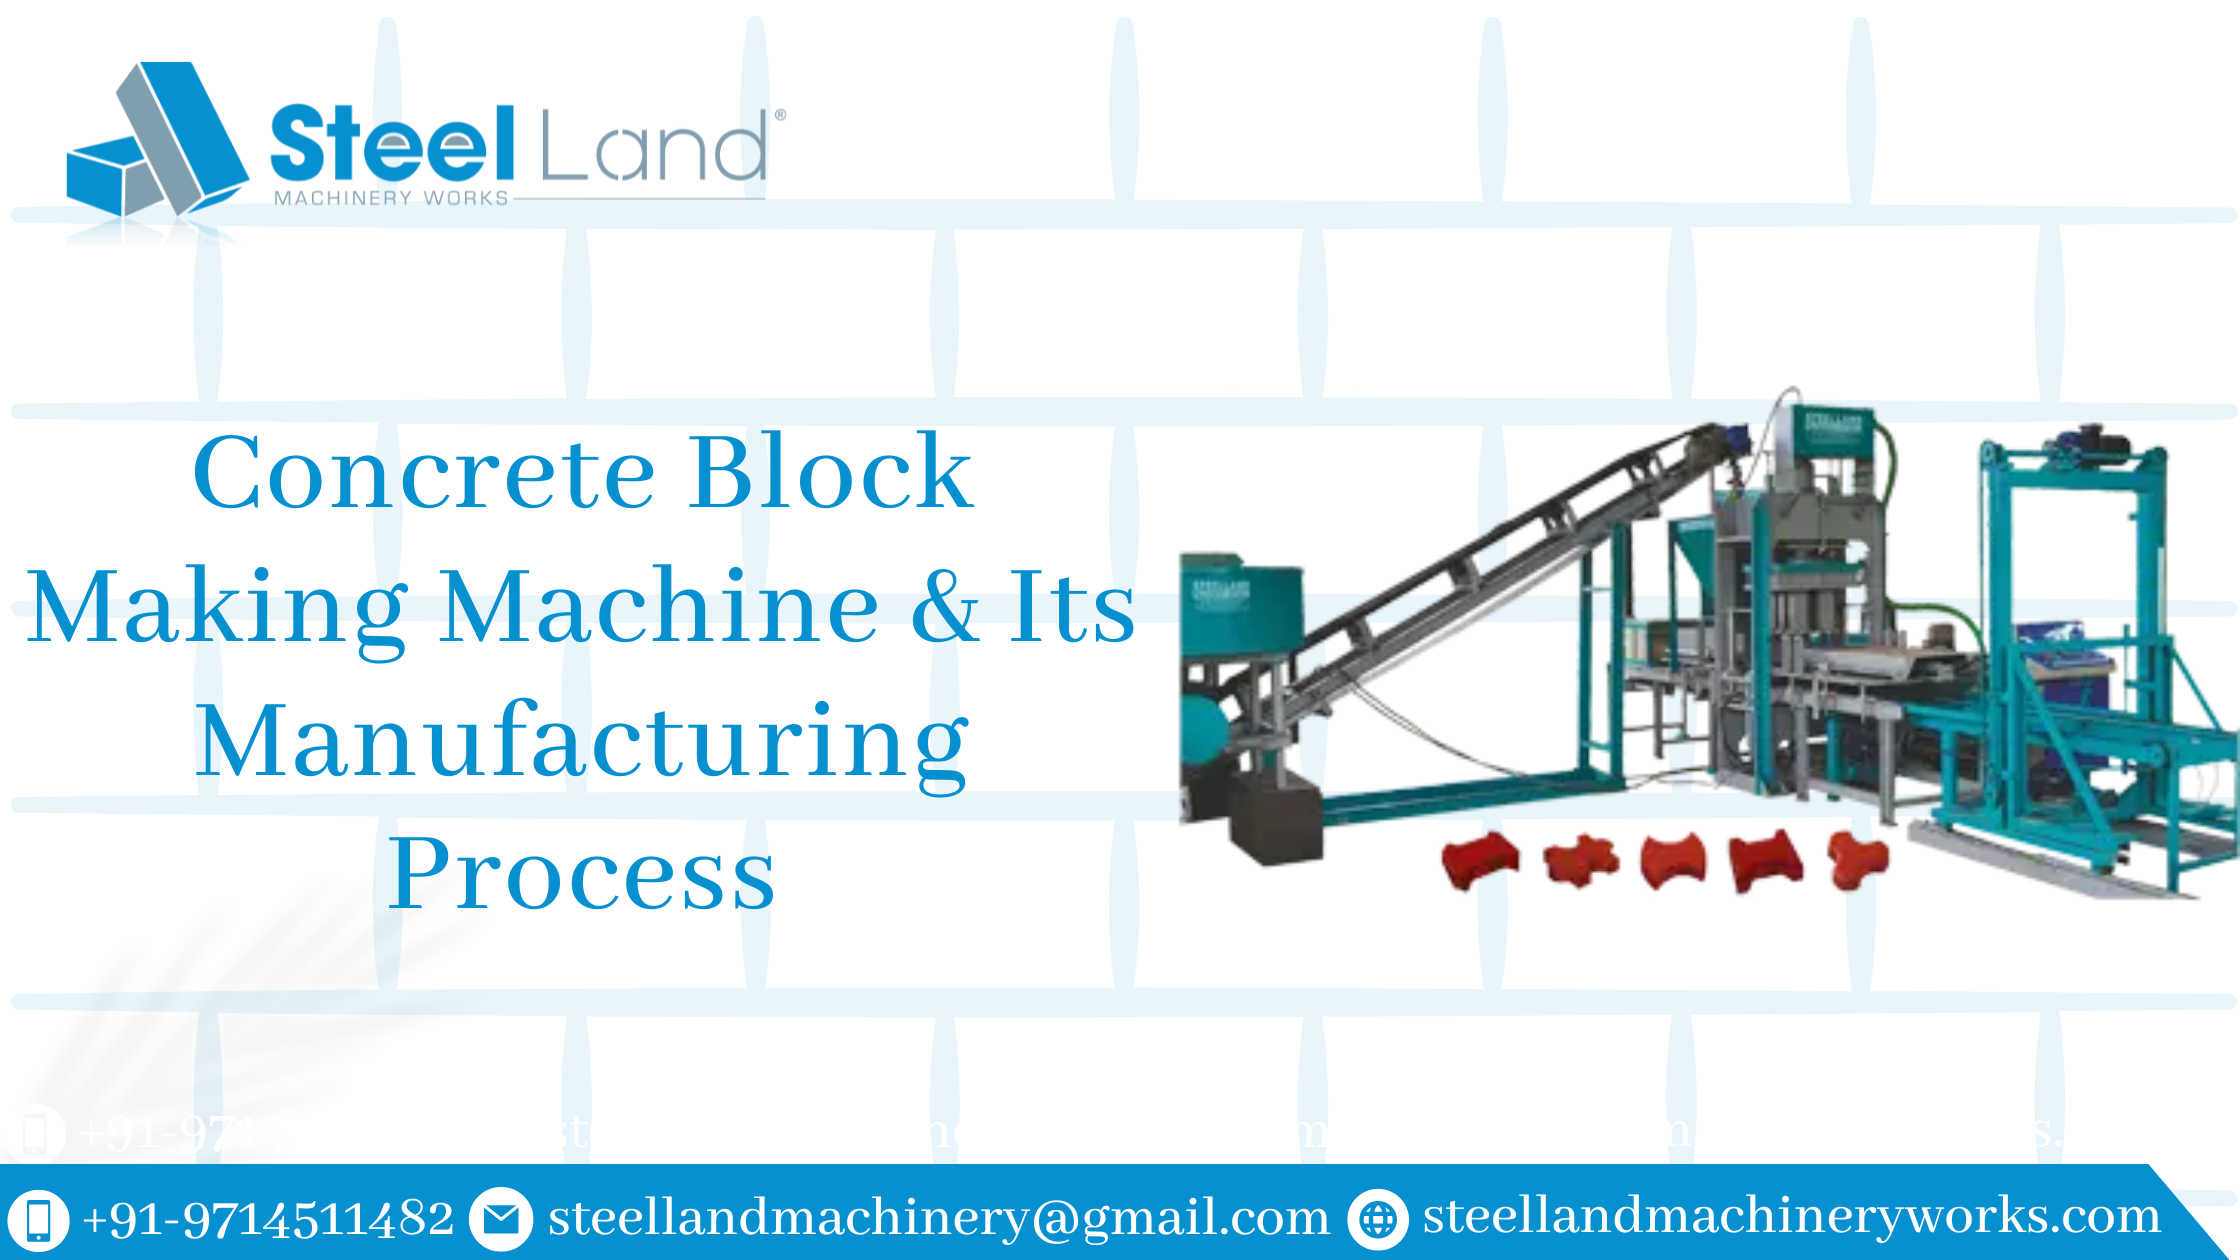 Concrete Block Making Machine and Its Manufacturing Process